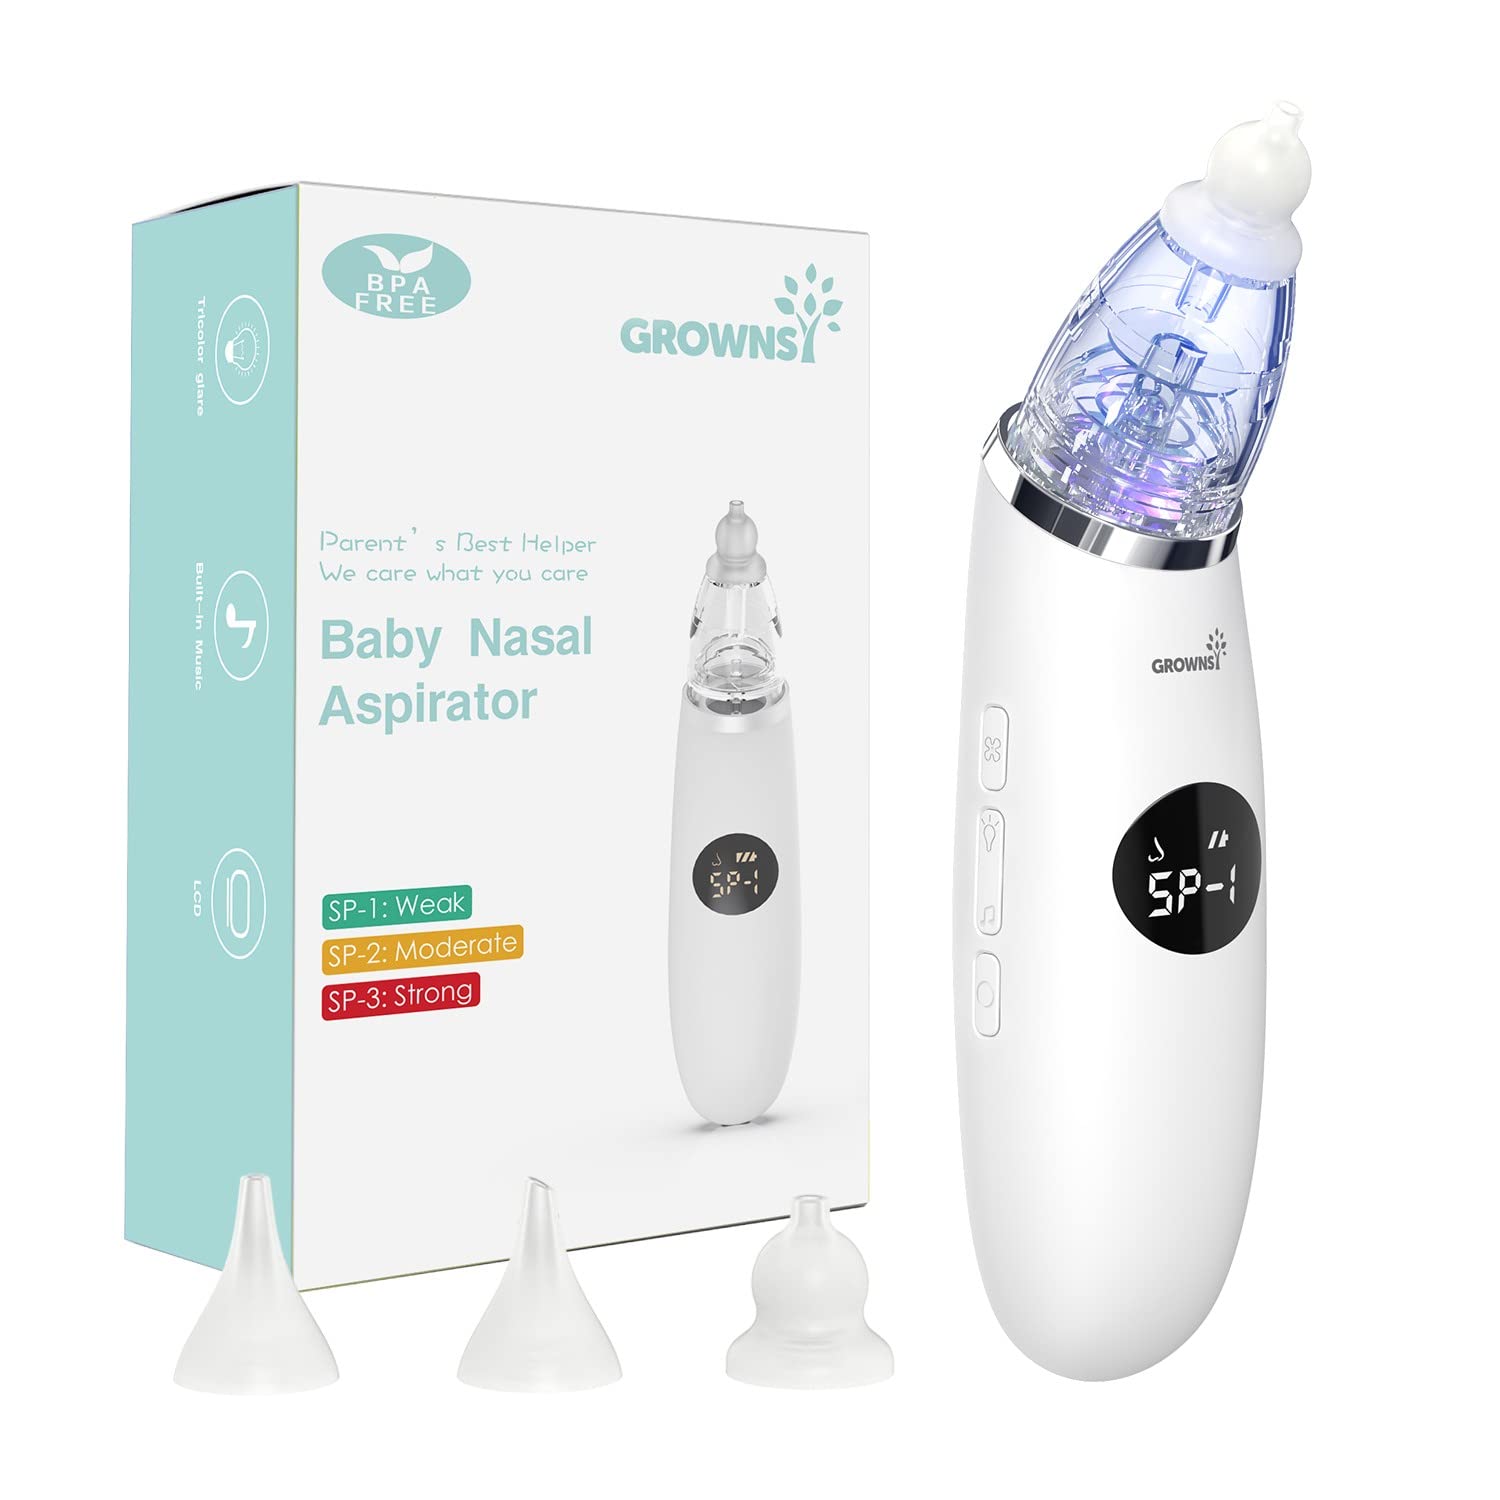 GROWNSY Nasal Aspirator for Baby | Baby Nose Sucker | Electric Nose Suction for Toddler, Automatic Booger Sucker with 3 Silicone